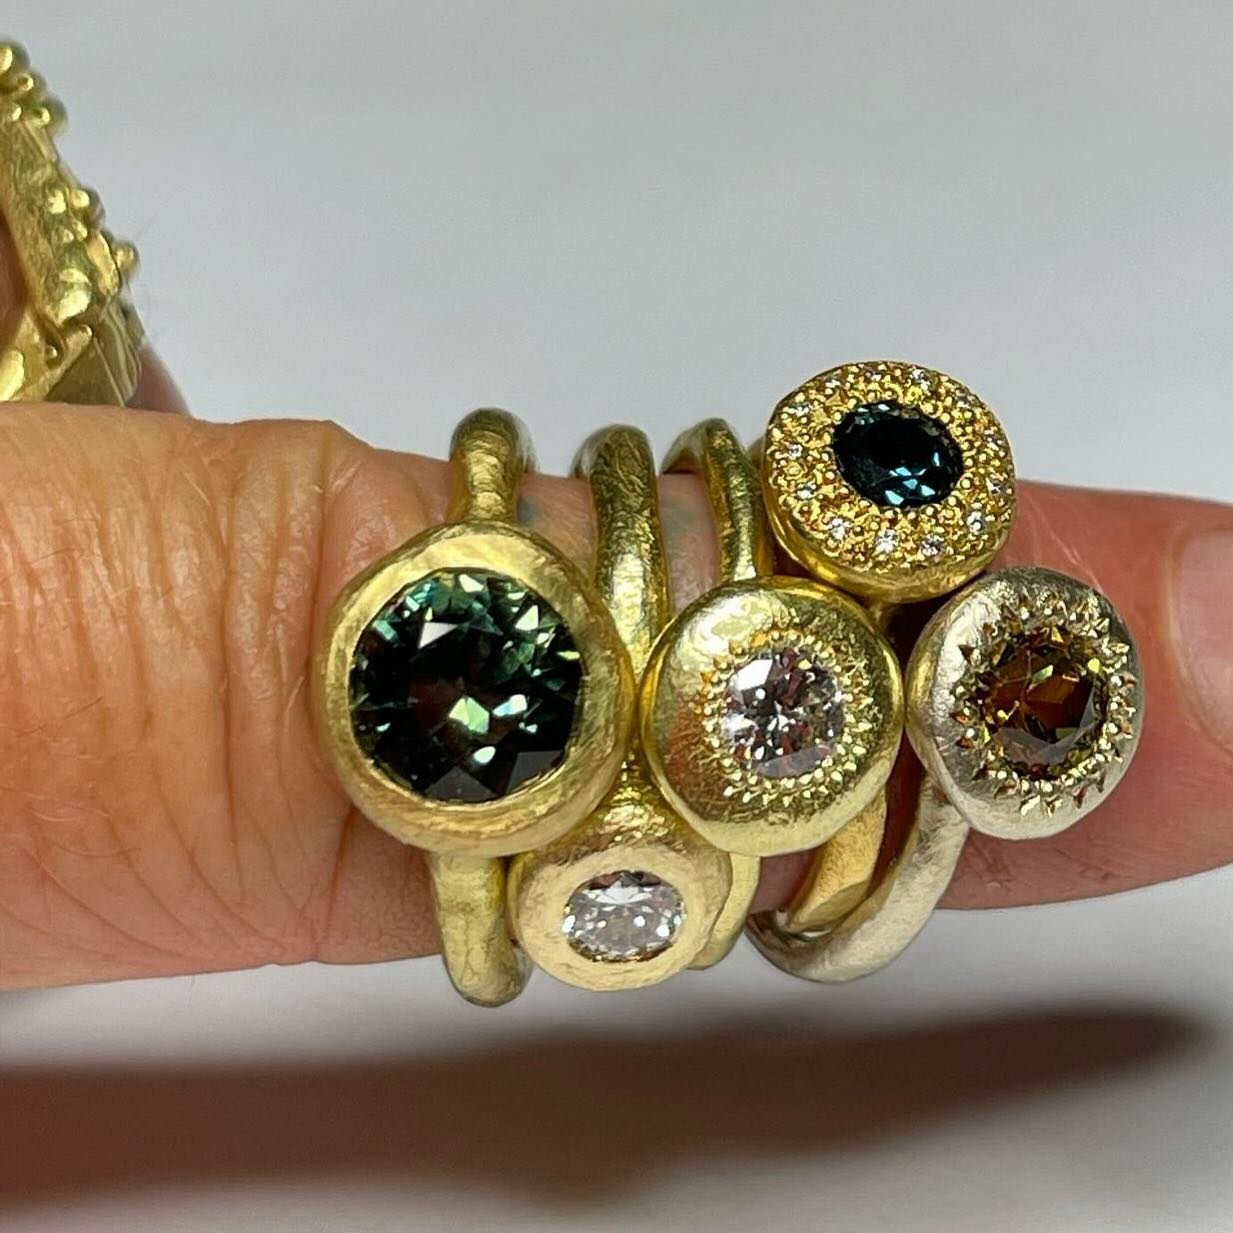 All the rings!

18ct yellow gold To Manifest set with an 8mm
Australian parti sapphire.
18ct yellow gold To Hold ring set with an old cut diamond.
18ct yellow gold Large Pledge ring set with a diamond.
18ct yellow gold Large Pledge ring set with an A